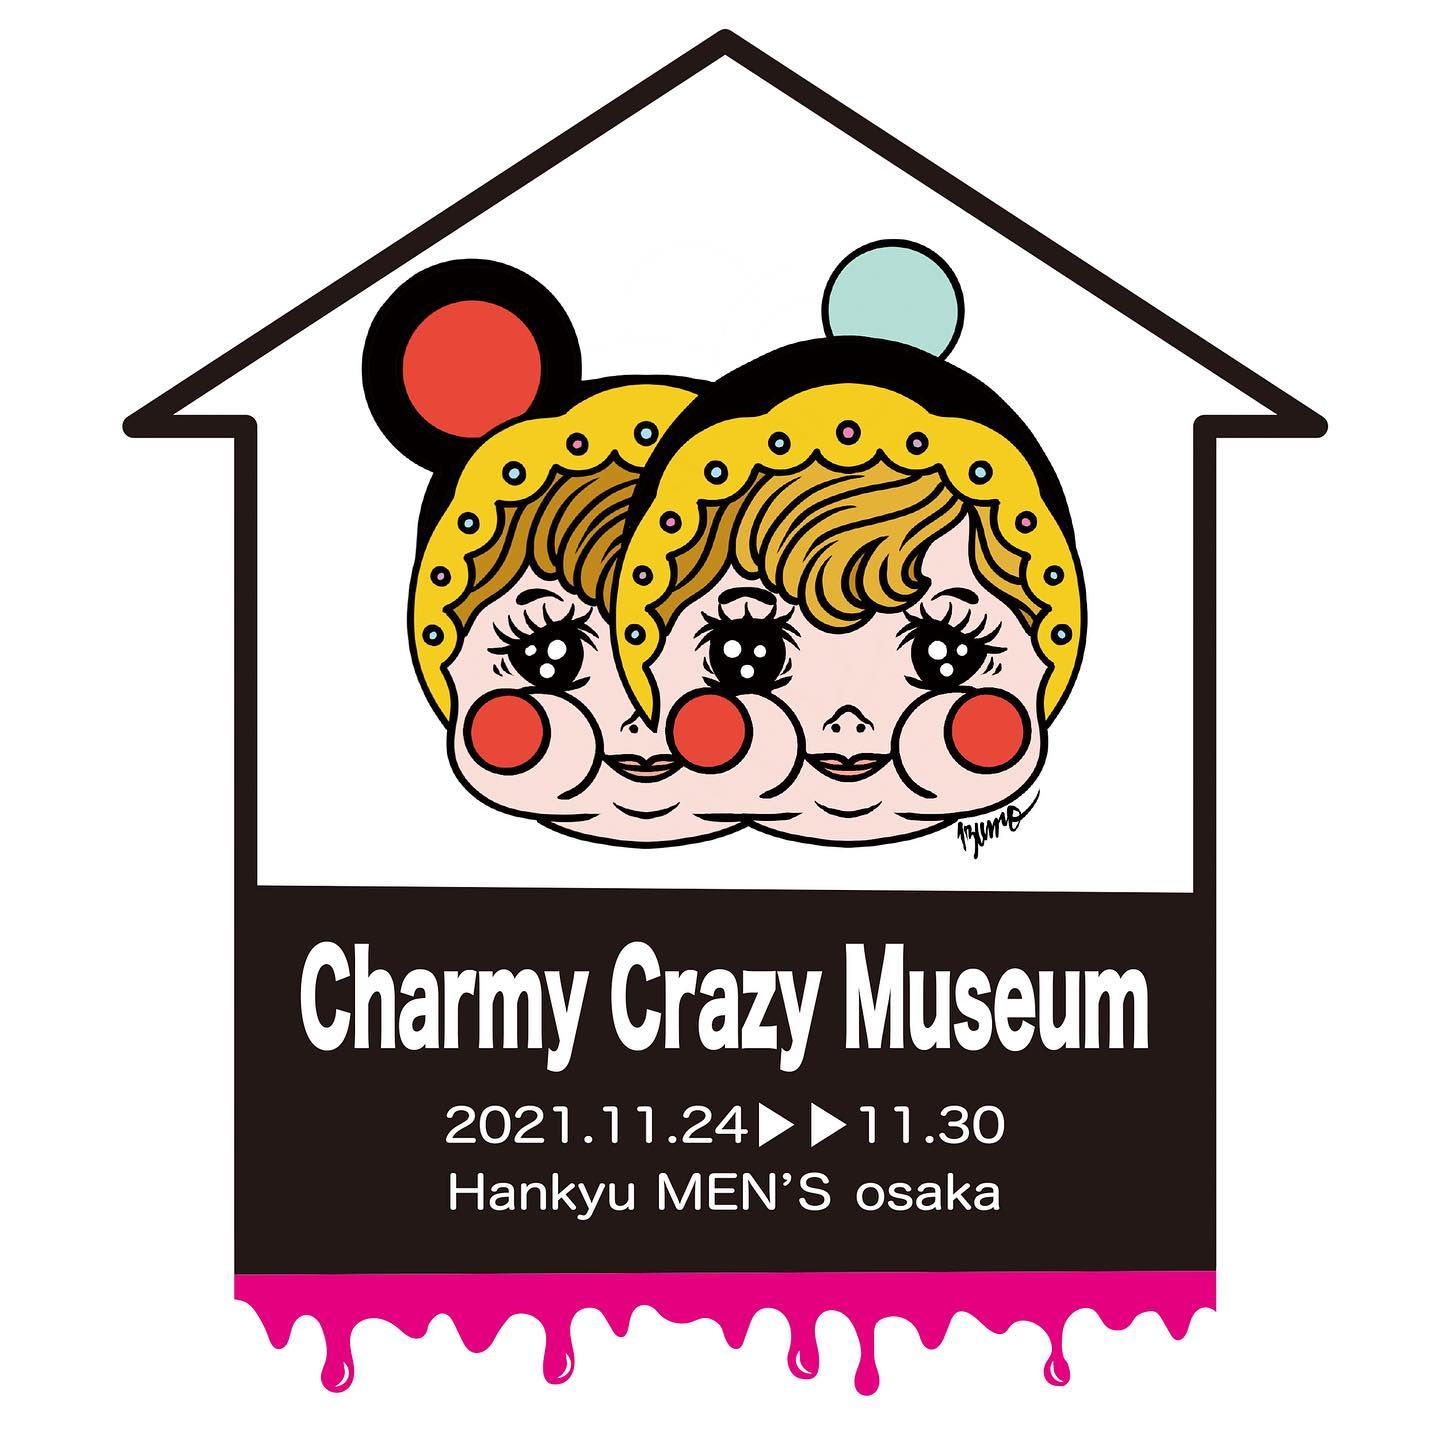 Charmy crazy museum